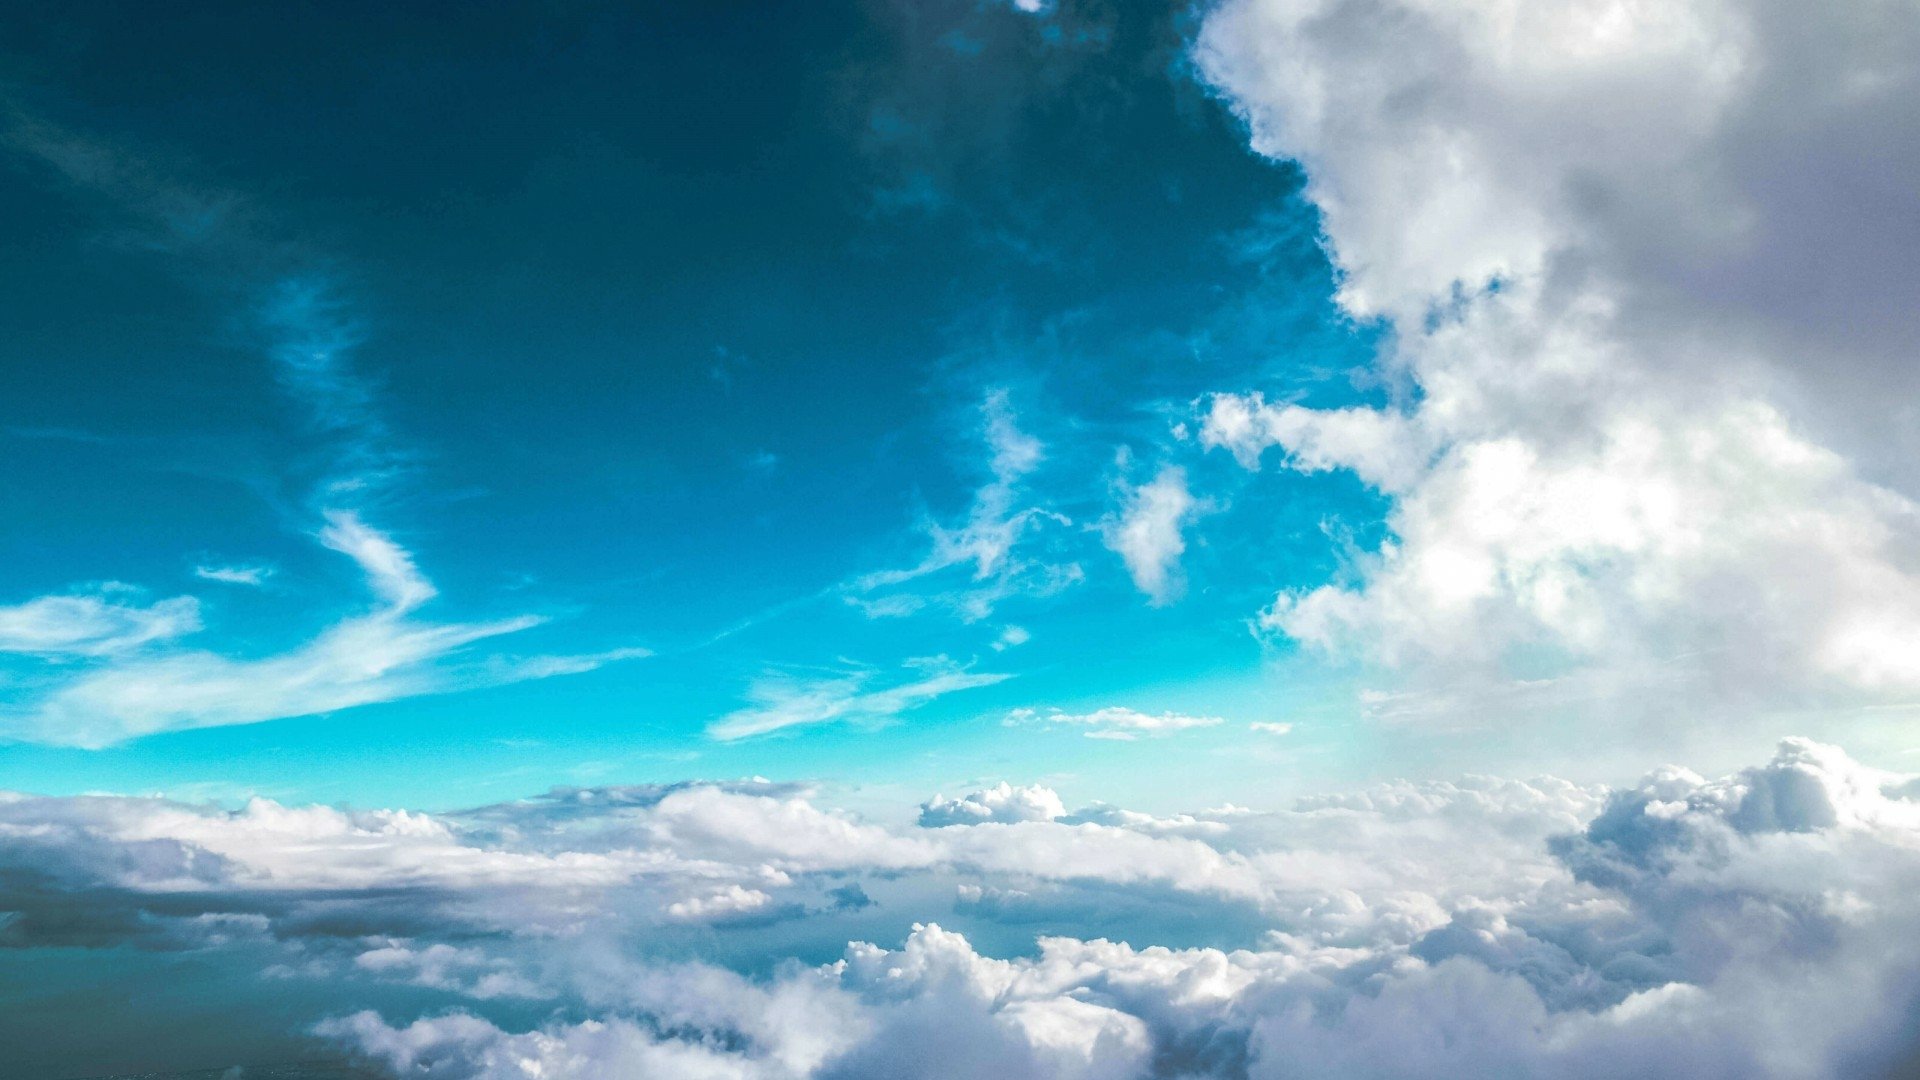 Blue Sky and Clouds HD Wallpaper | Background Image | 1920x1080 | ID